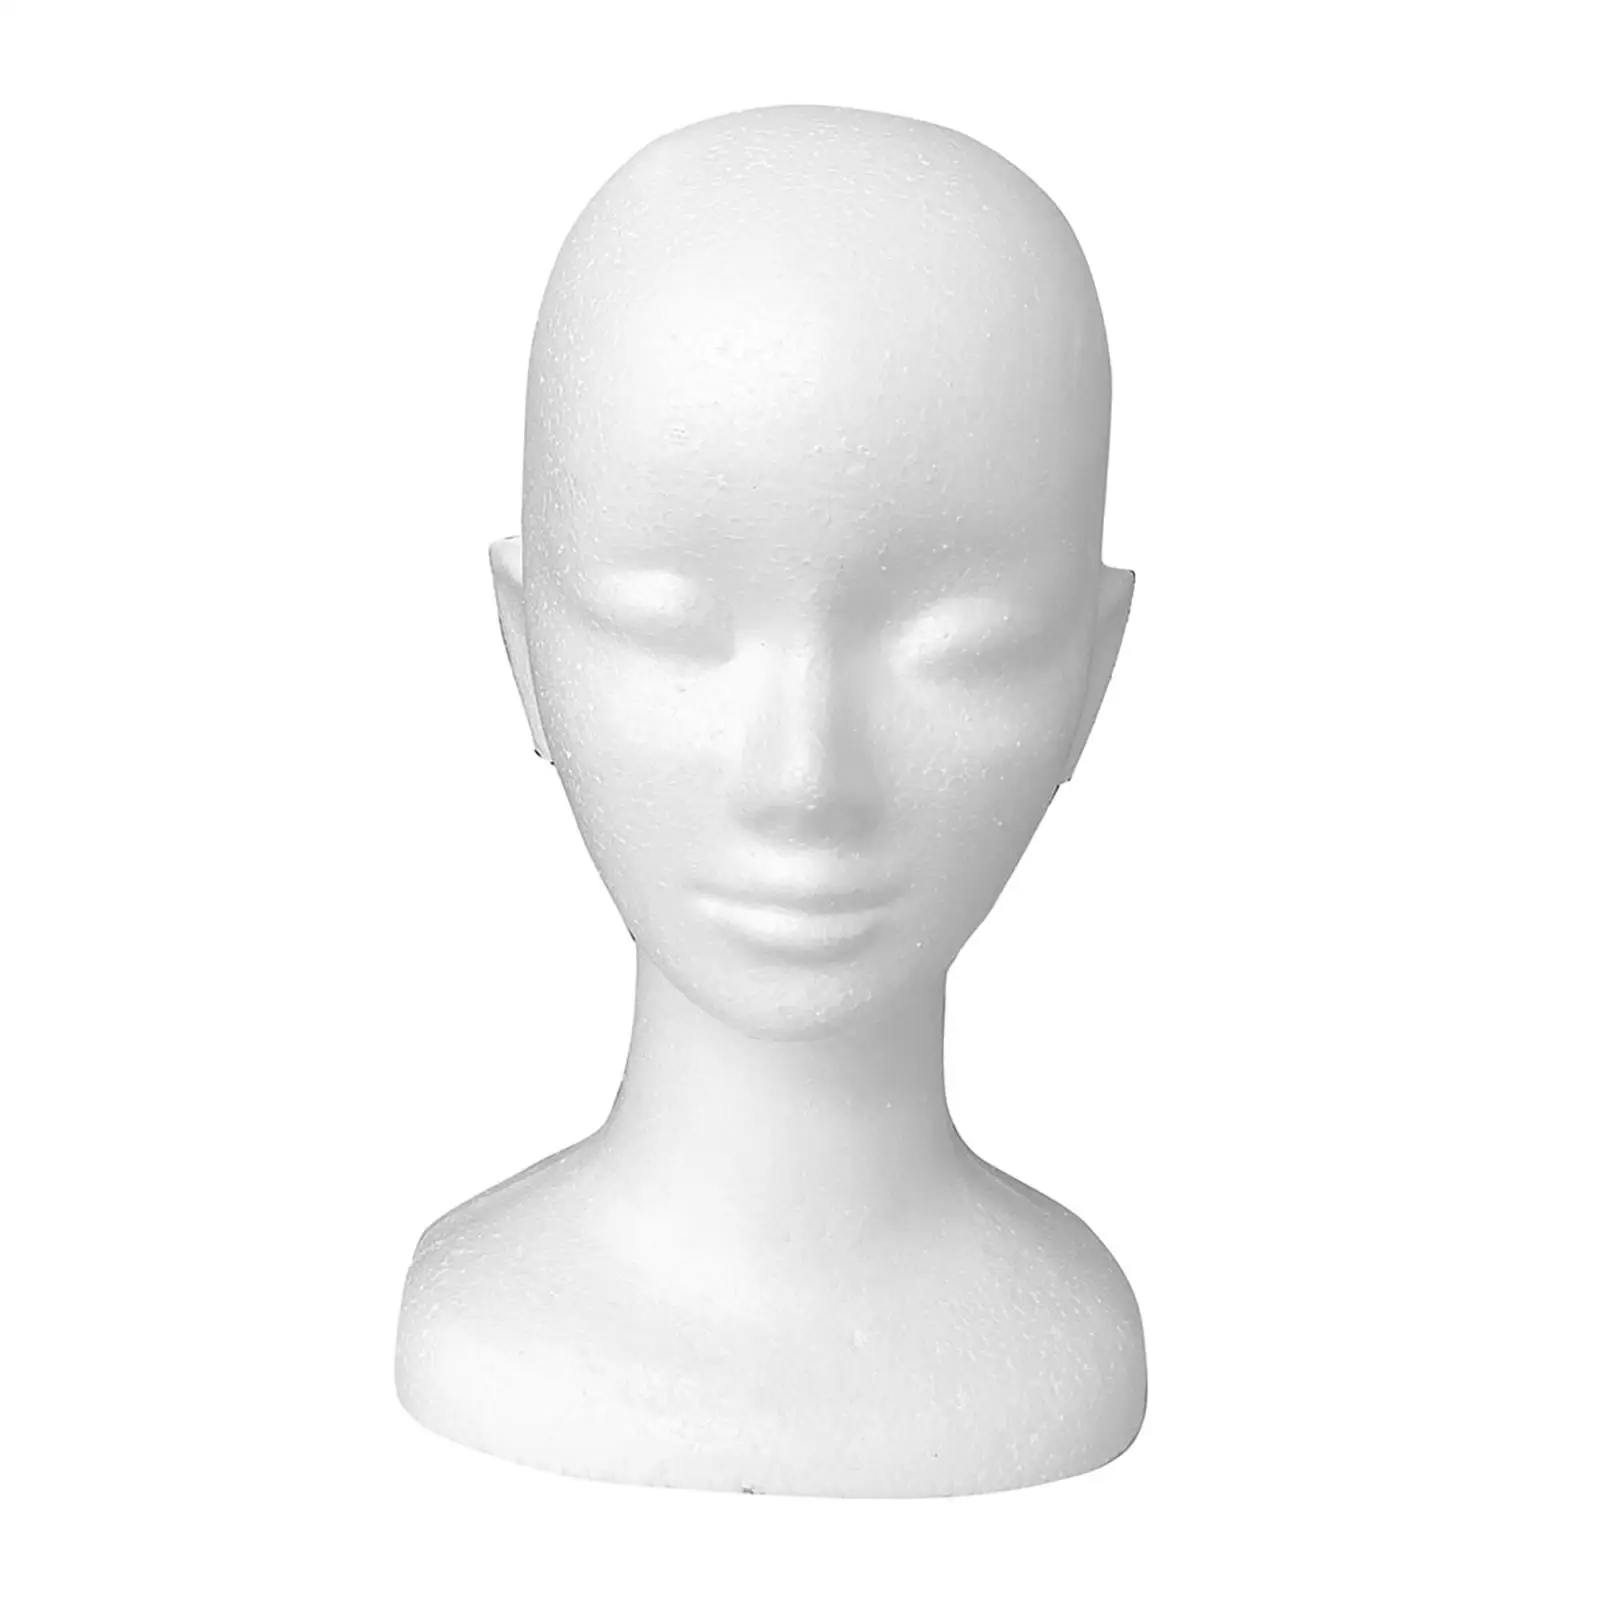 Mannequin Head Stand Model White Lightweight Stable Manikin Head Hair Glasses Hat Display for Hats Headset Home Sunglasses Salon